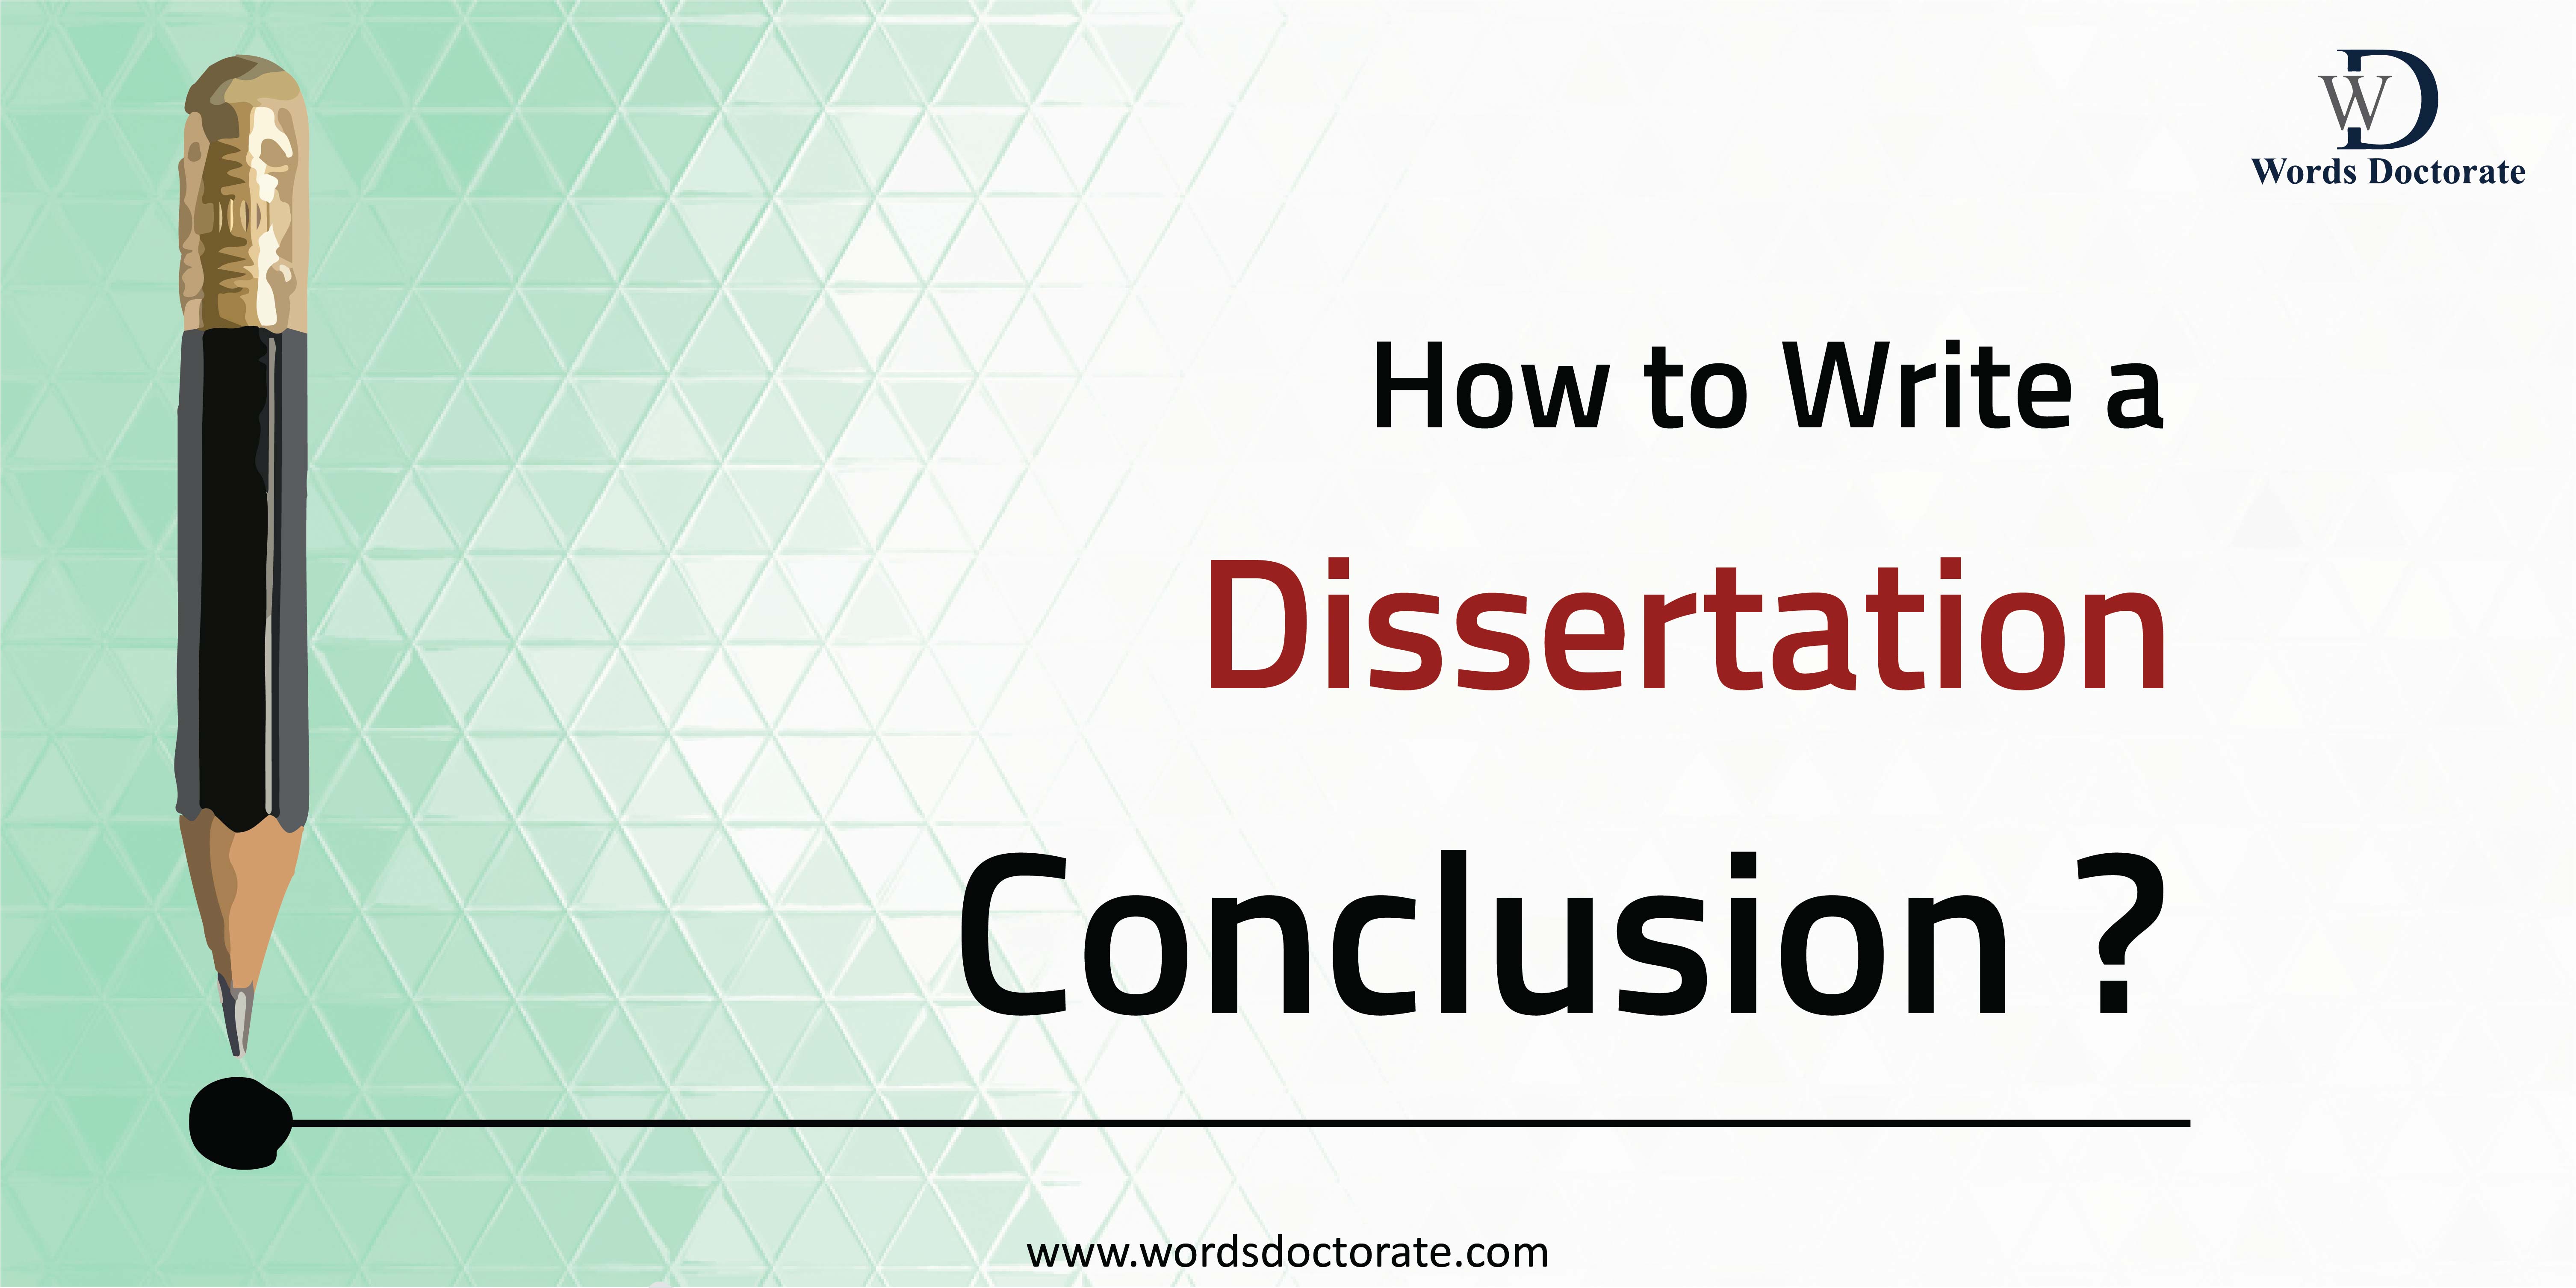 How to Write a Dissertation Conclusion